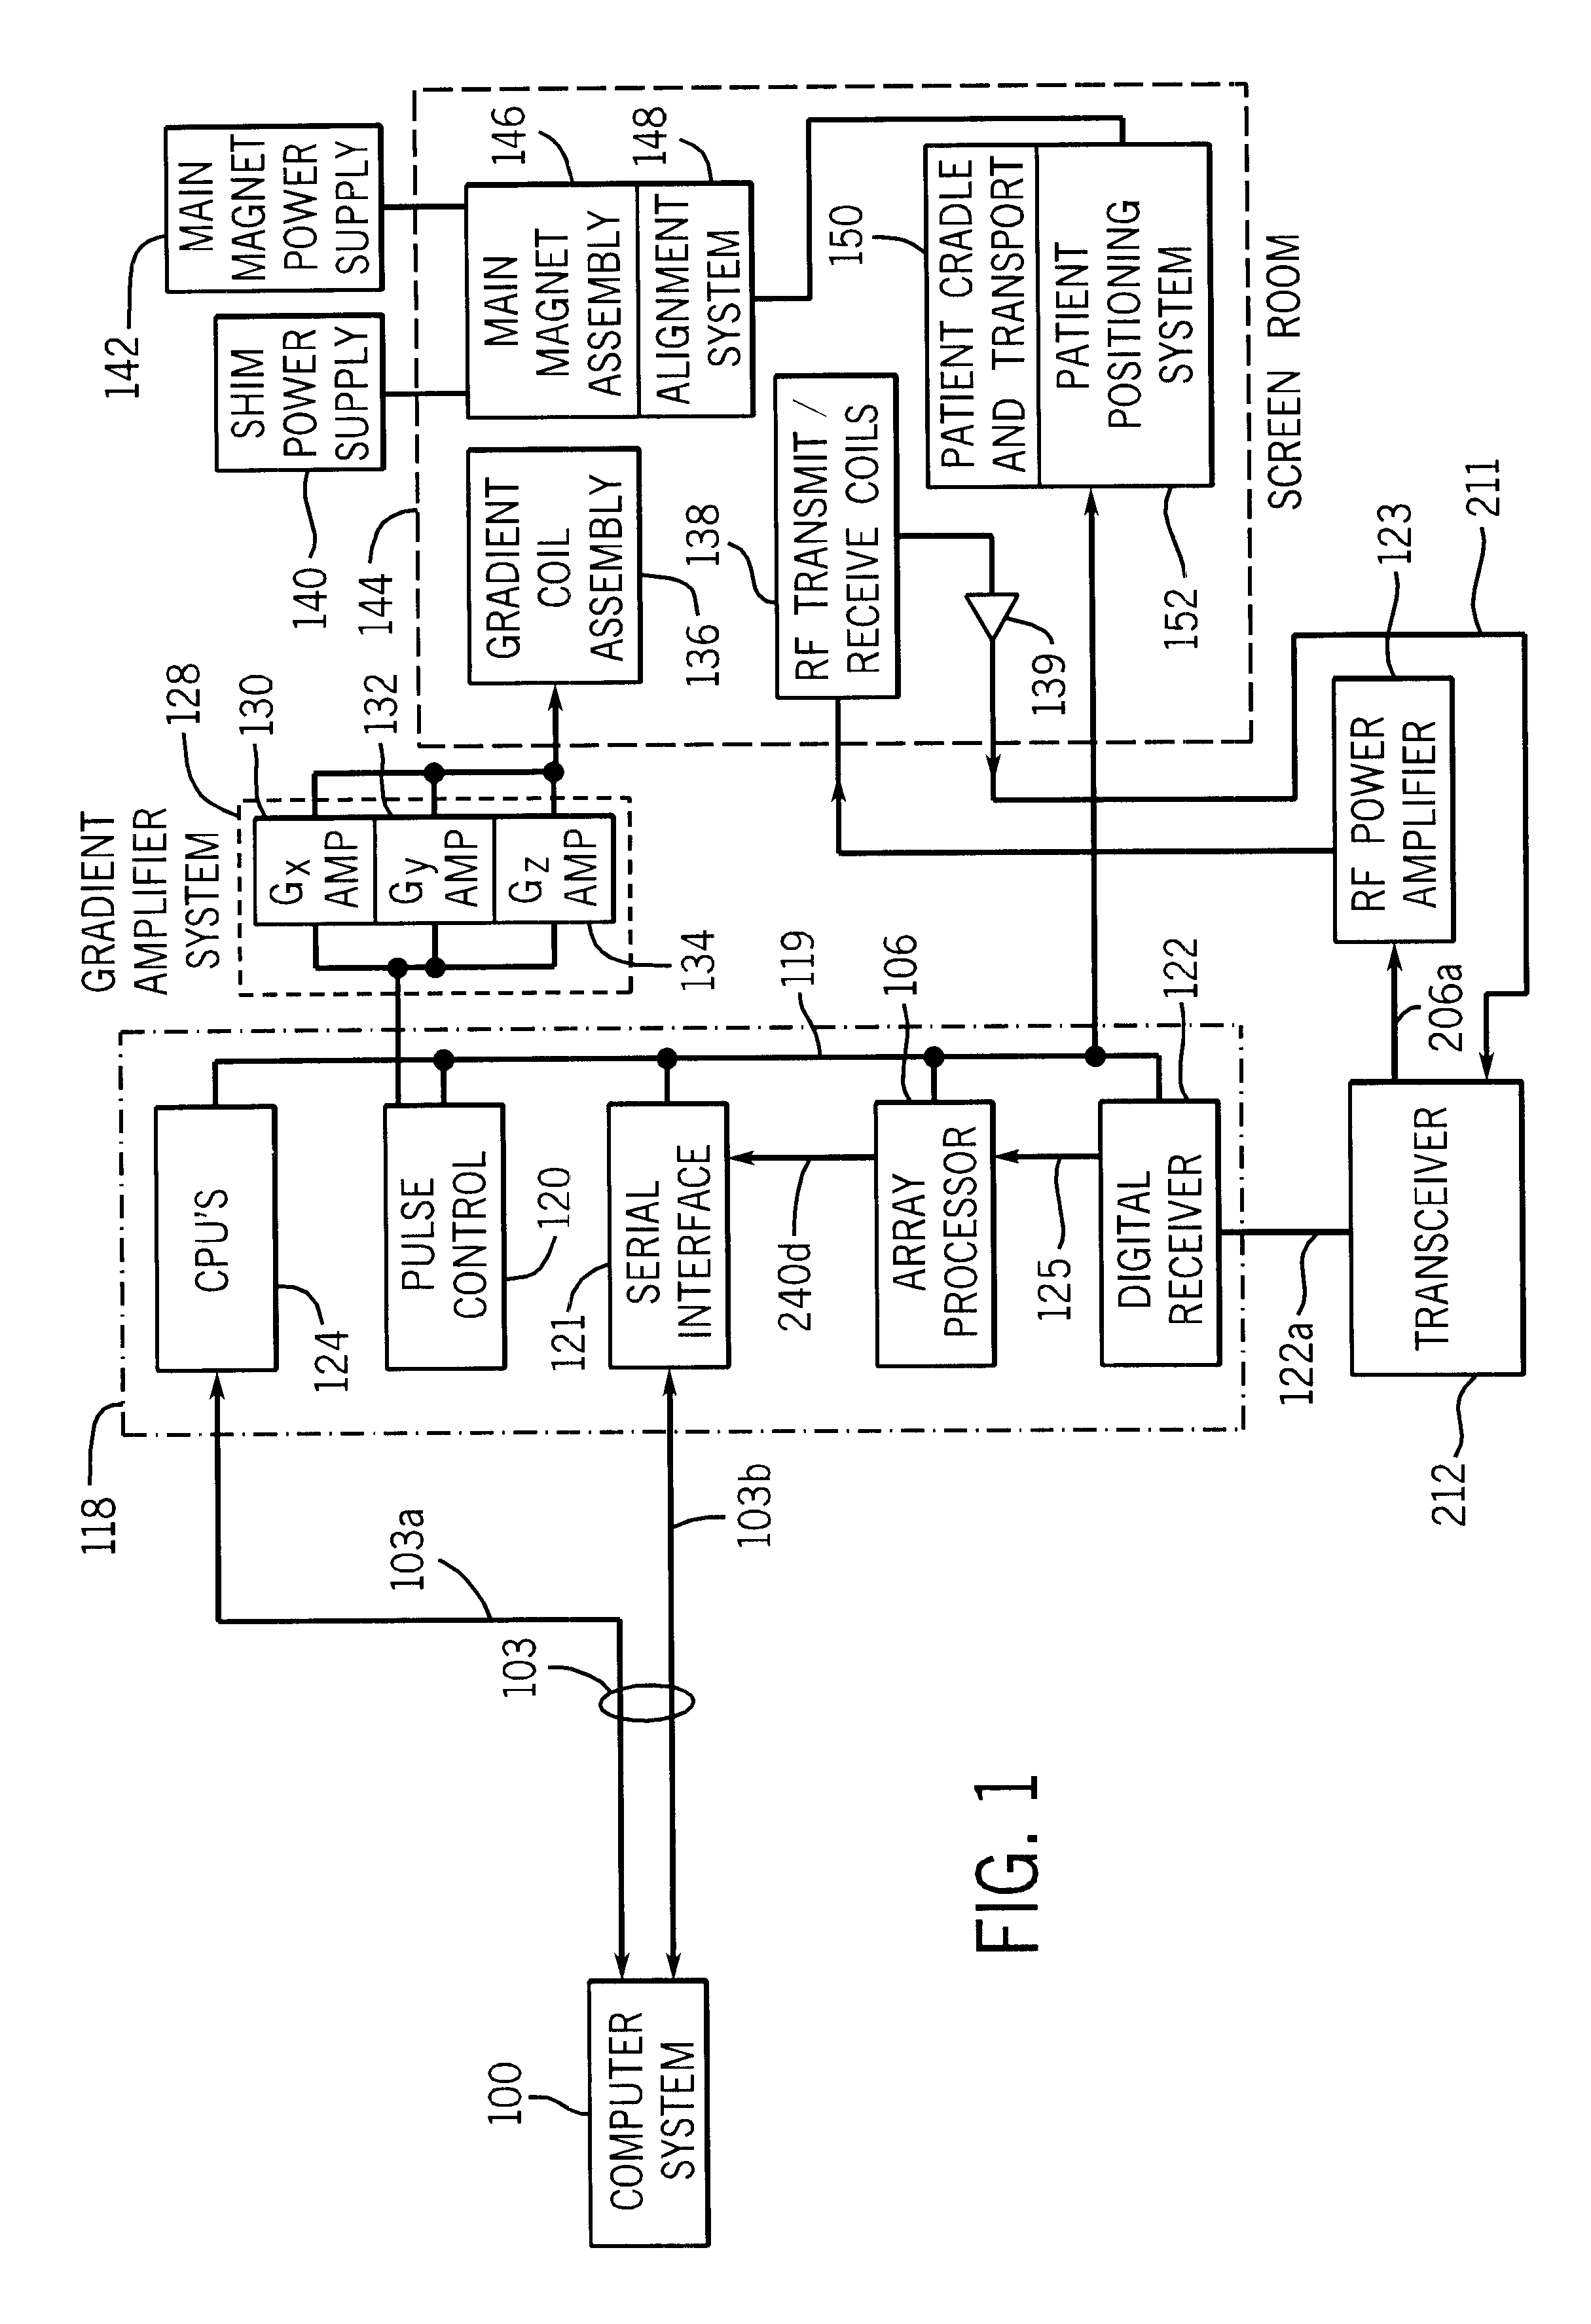 System and method for filtering frequency encoded imaging signals